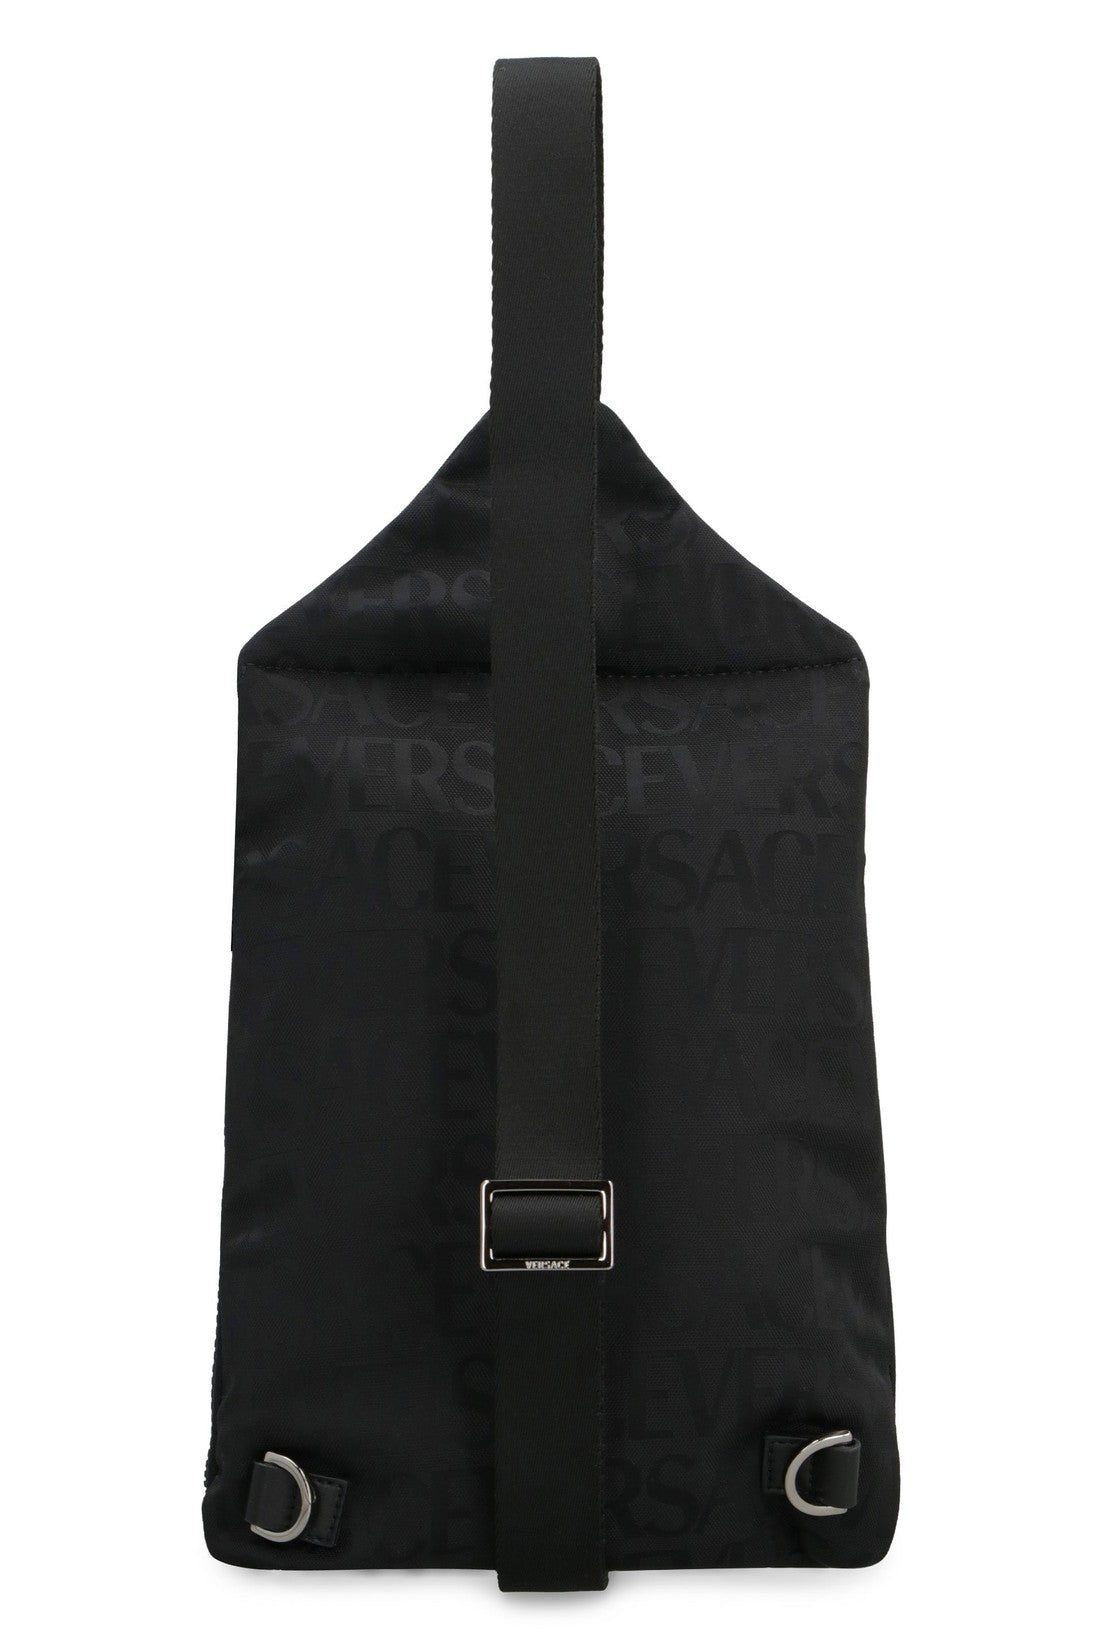 Versace-OUTLET-SALE-Technical fabric backpack with logo-ARCHIVIST